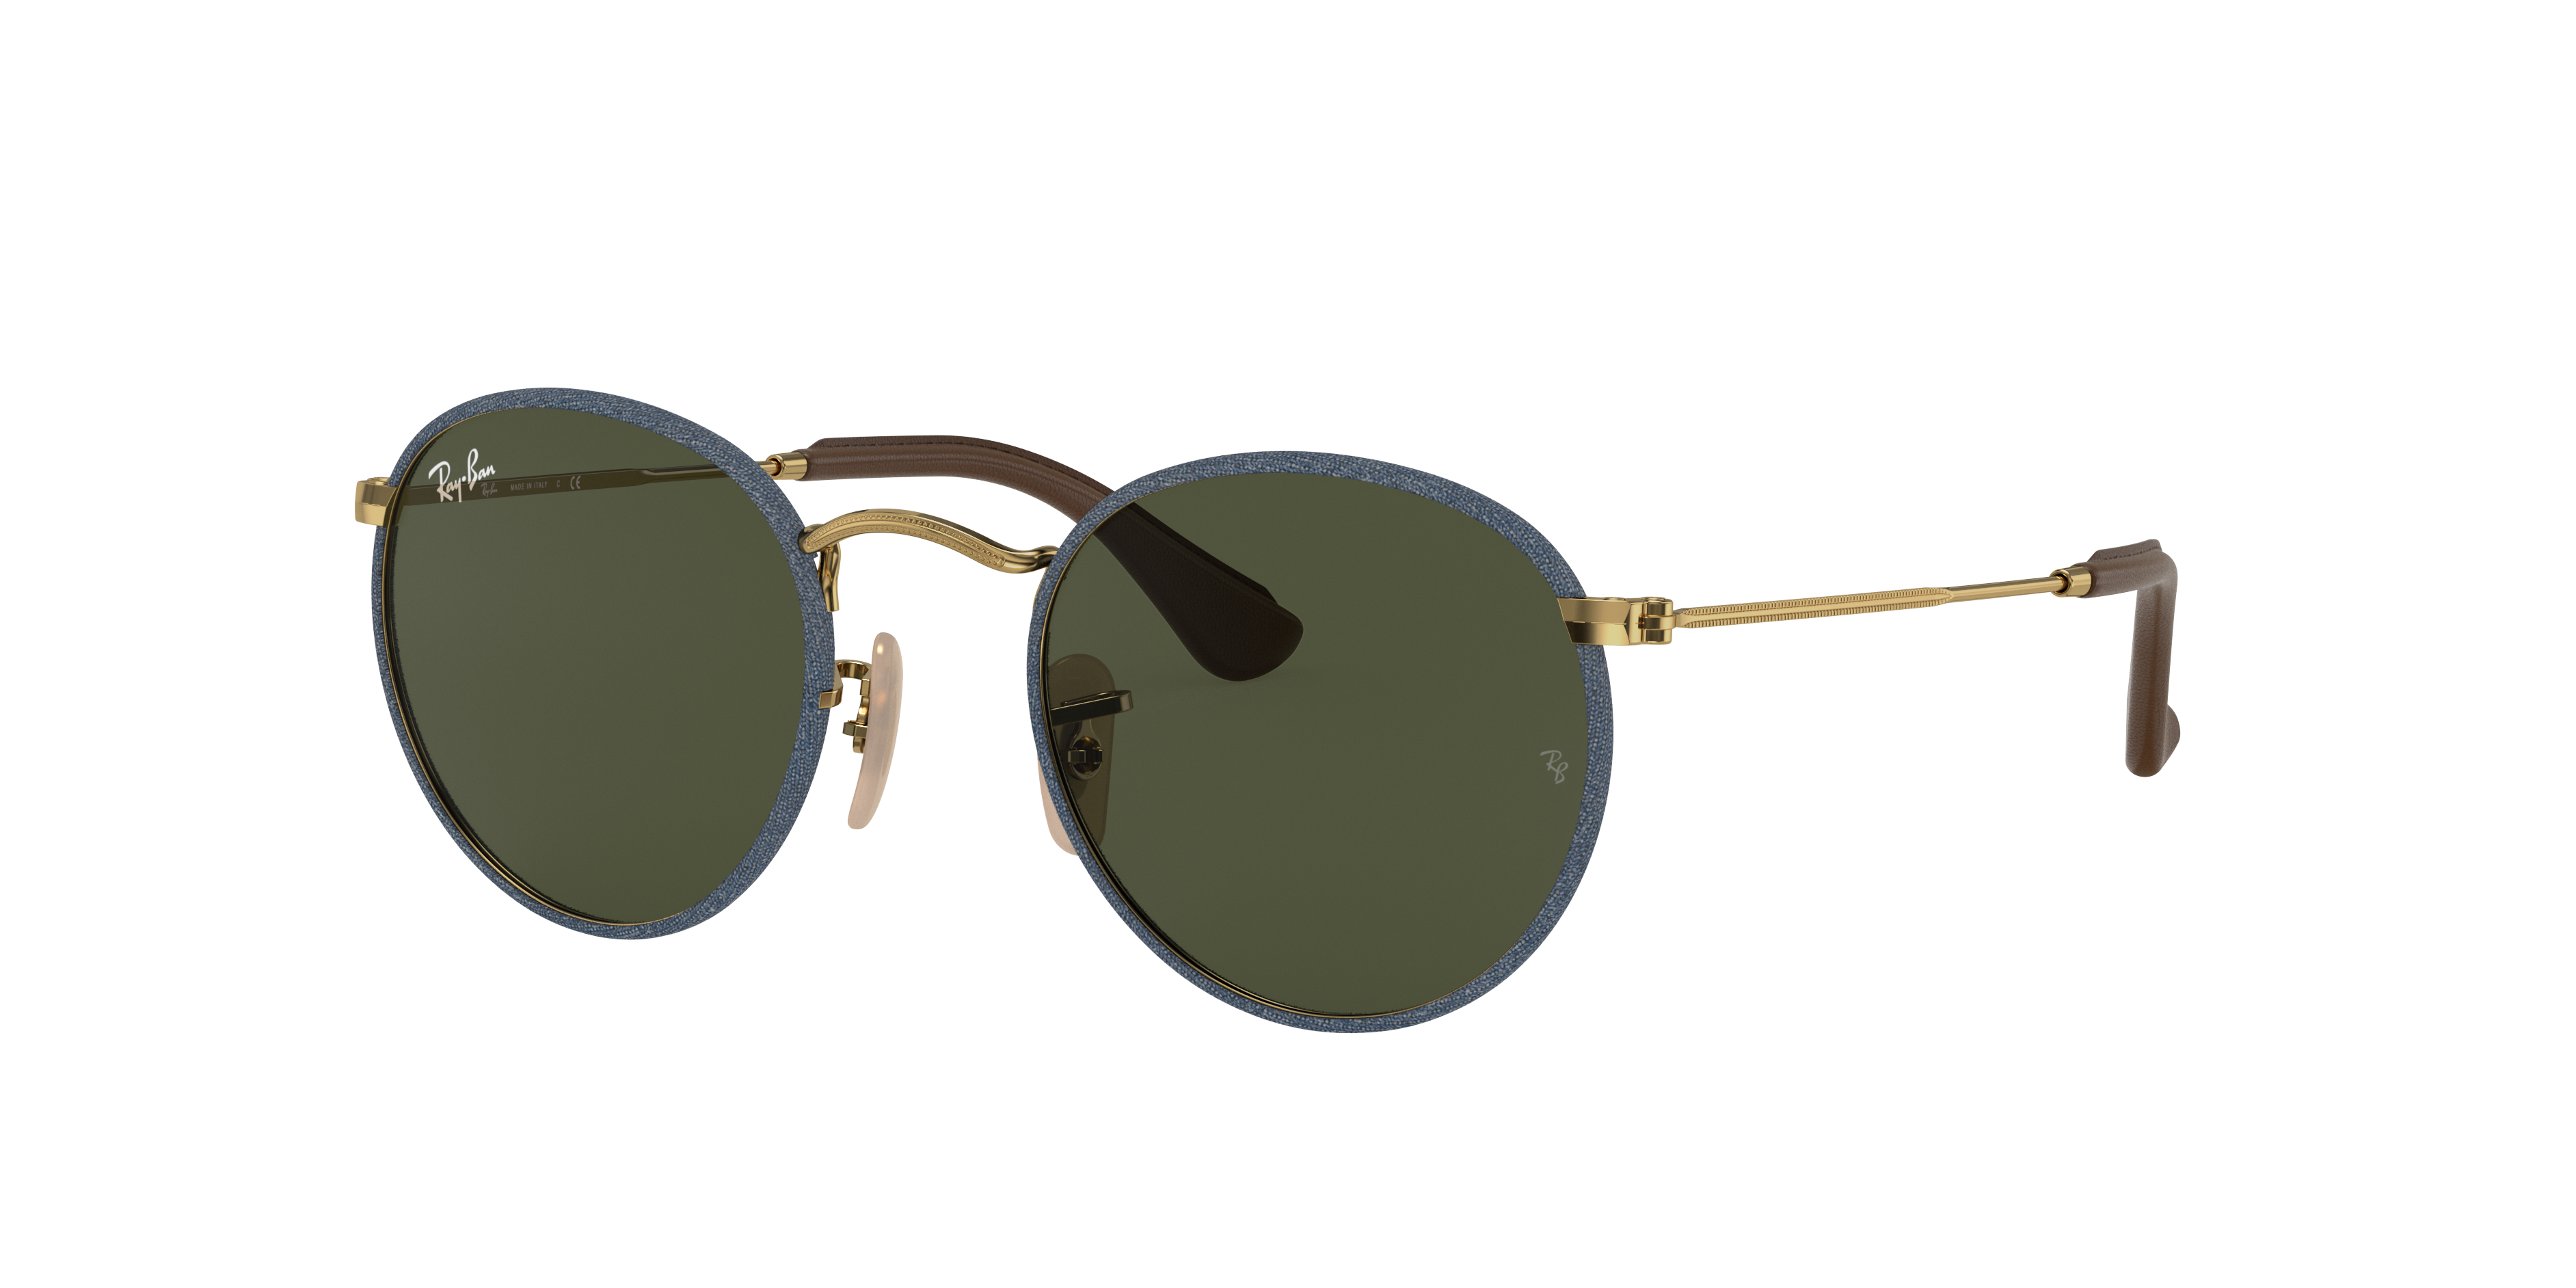 Round Craft Sunglasses in Blue Denim and Green - RB3475Q | Ray-Ban®